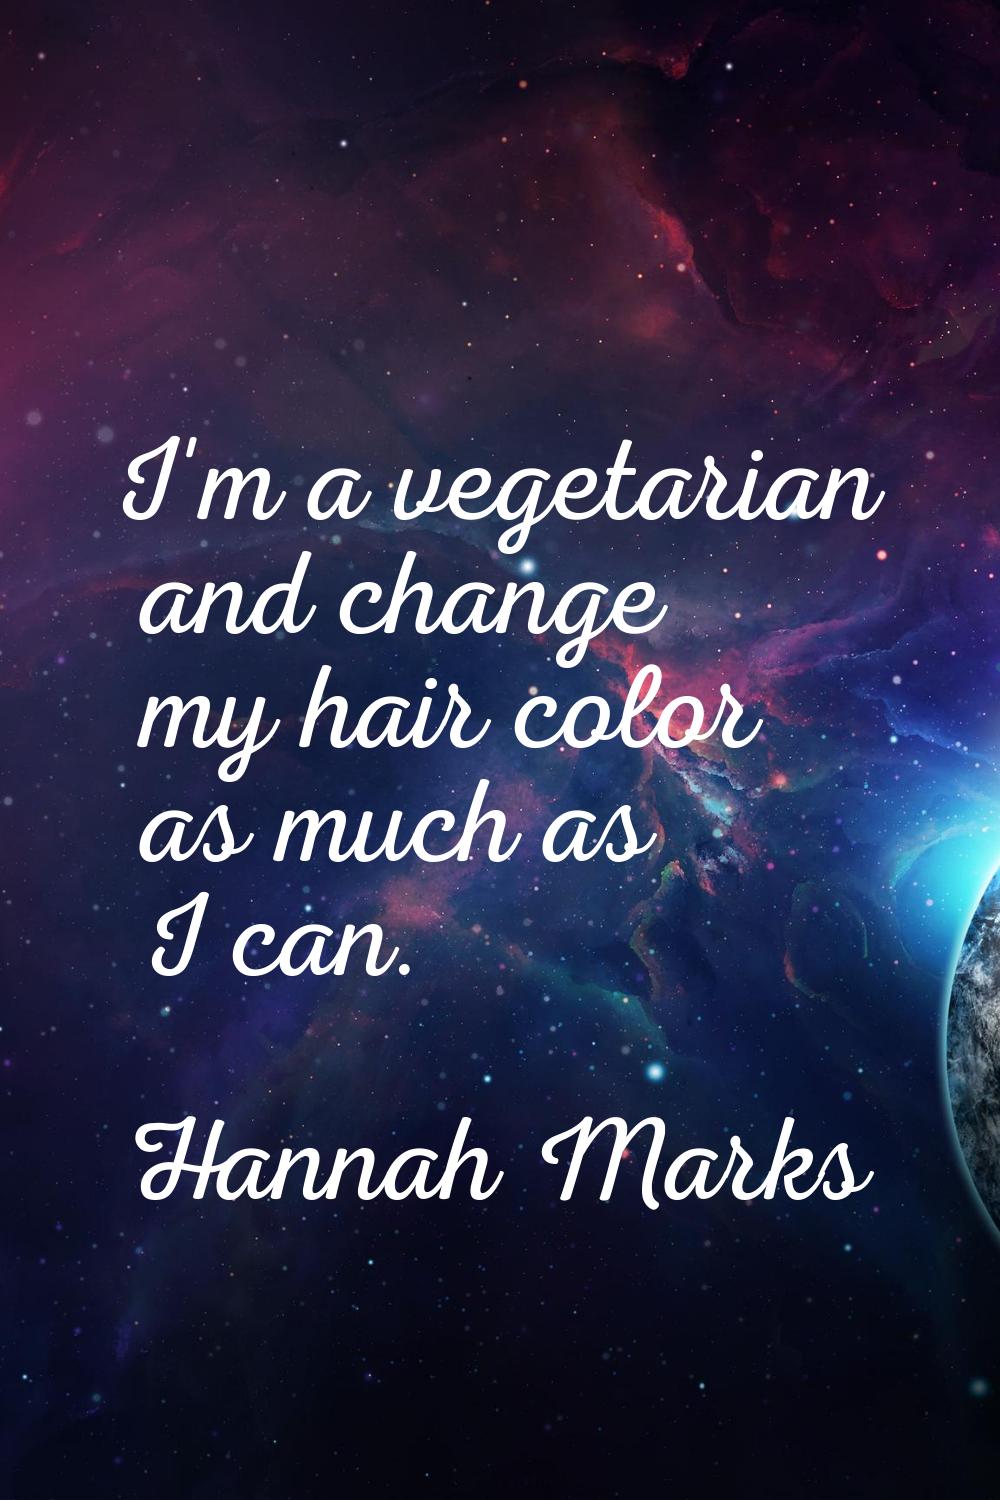 I'm a vegetarian and change my hair color as much as I can.